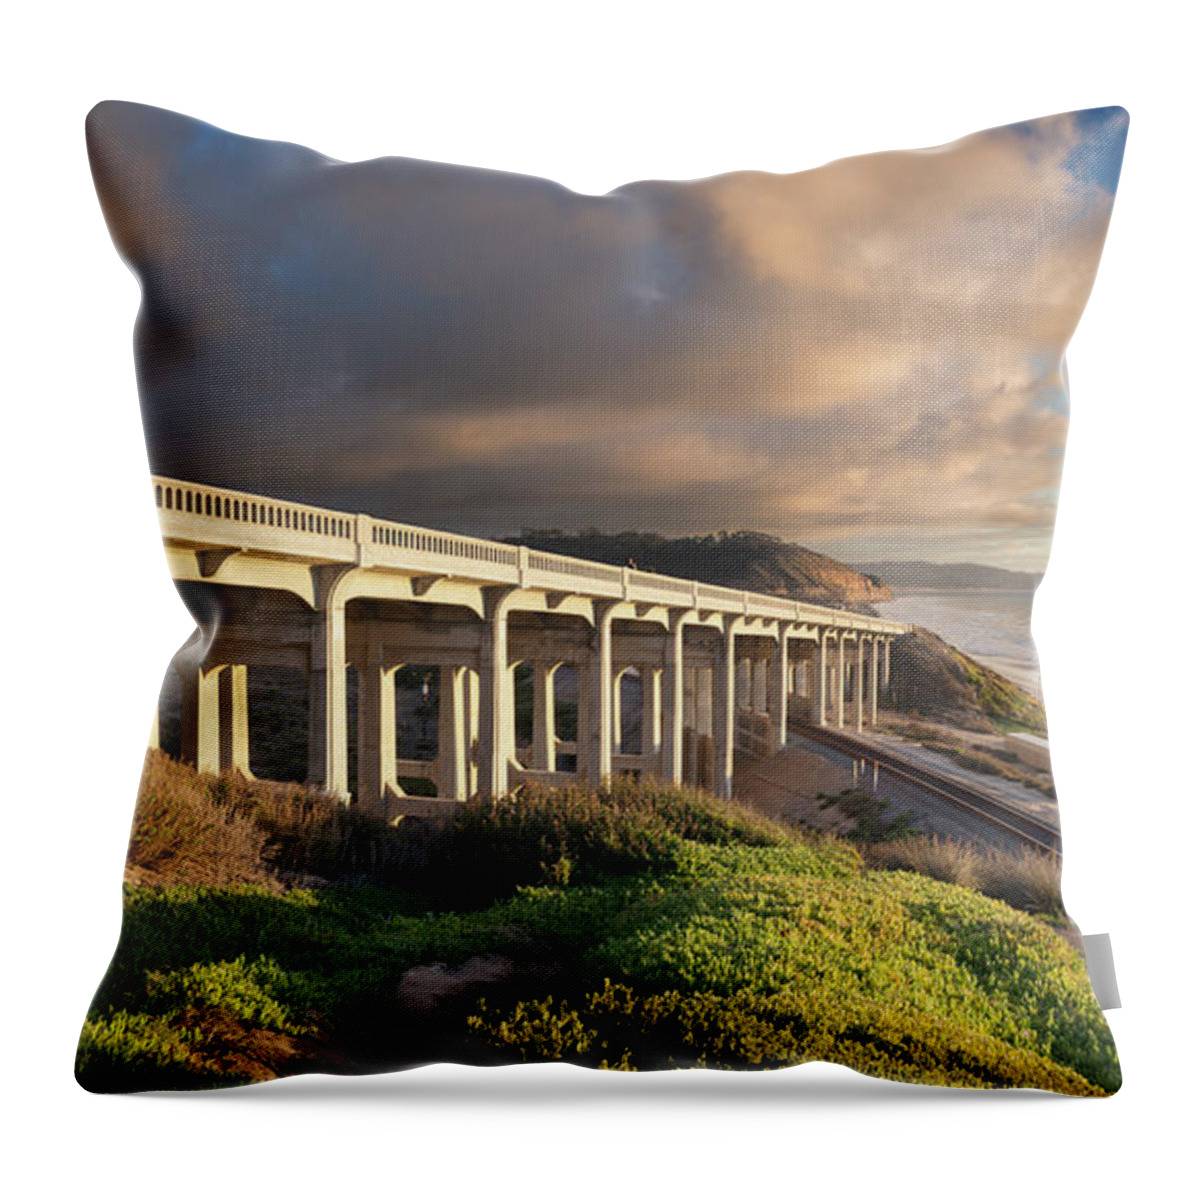 San Diego Throw Pillow featuring the photograph Torrey Pines Bridge Colorful Clouds by William Dunigan